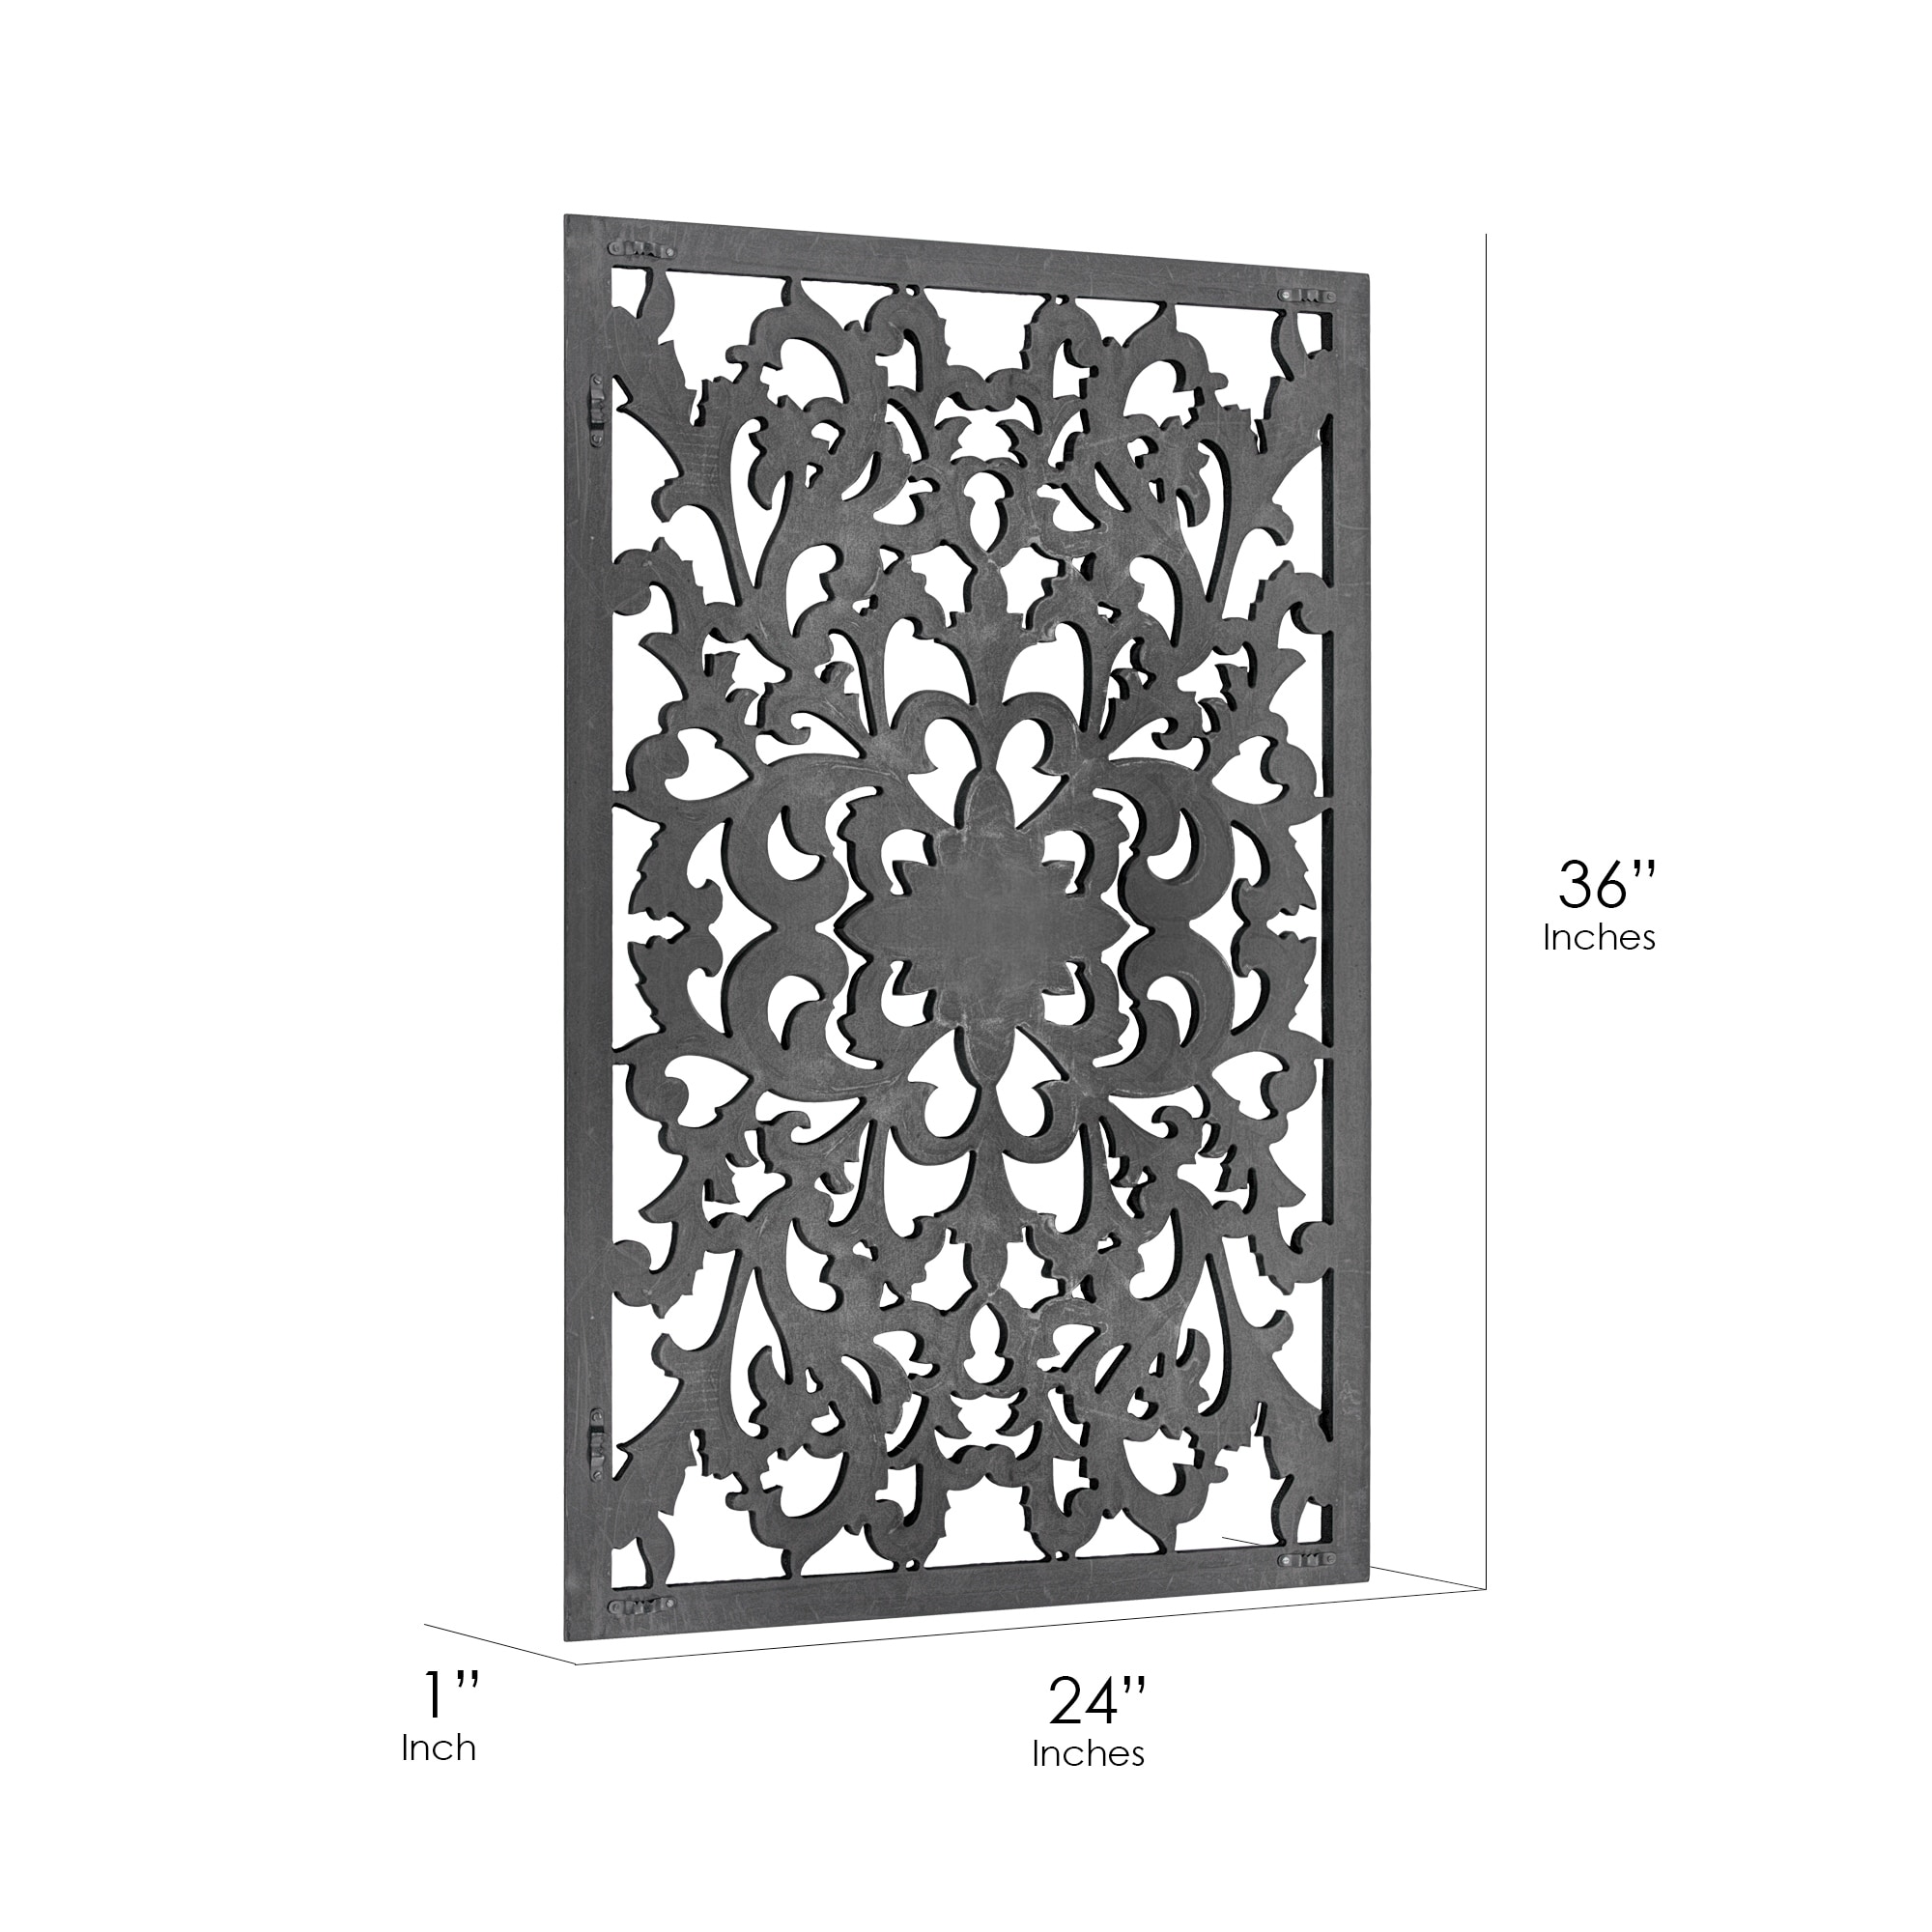 Hand-Carved Floral Wood Medallion Wall Art - Black (36" x 24")